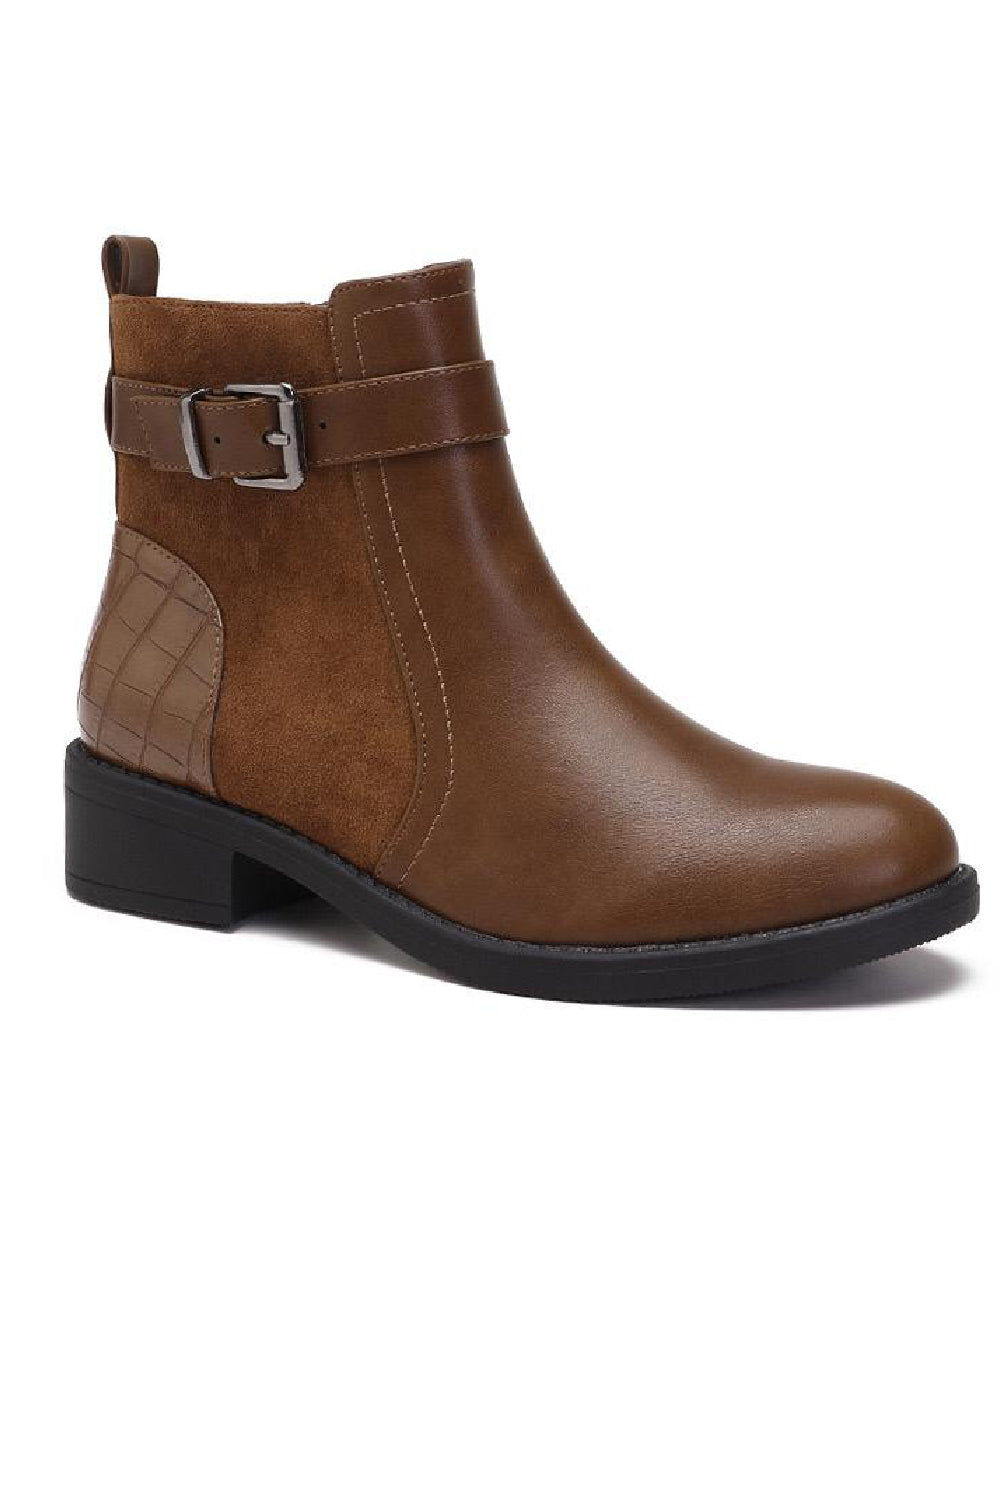 CAMEL FLAT BUCKLE DEATIAL ANKLE BOOTS